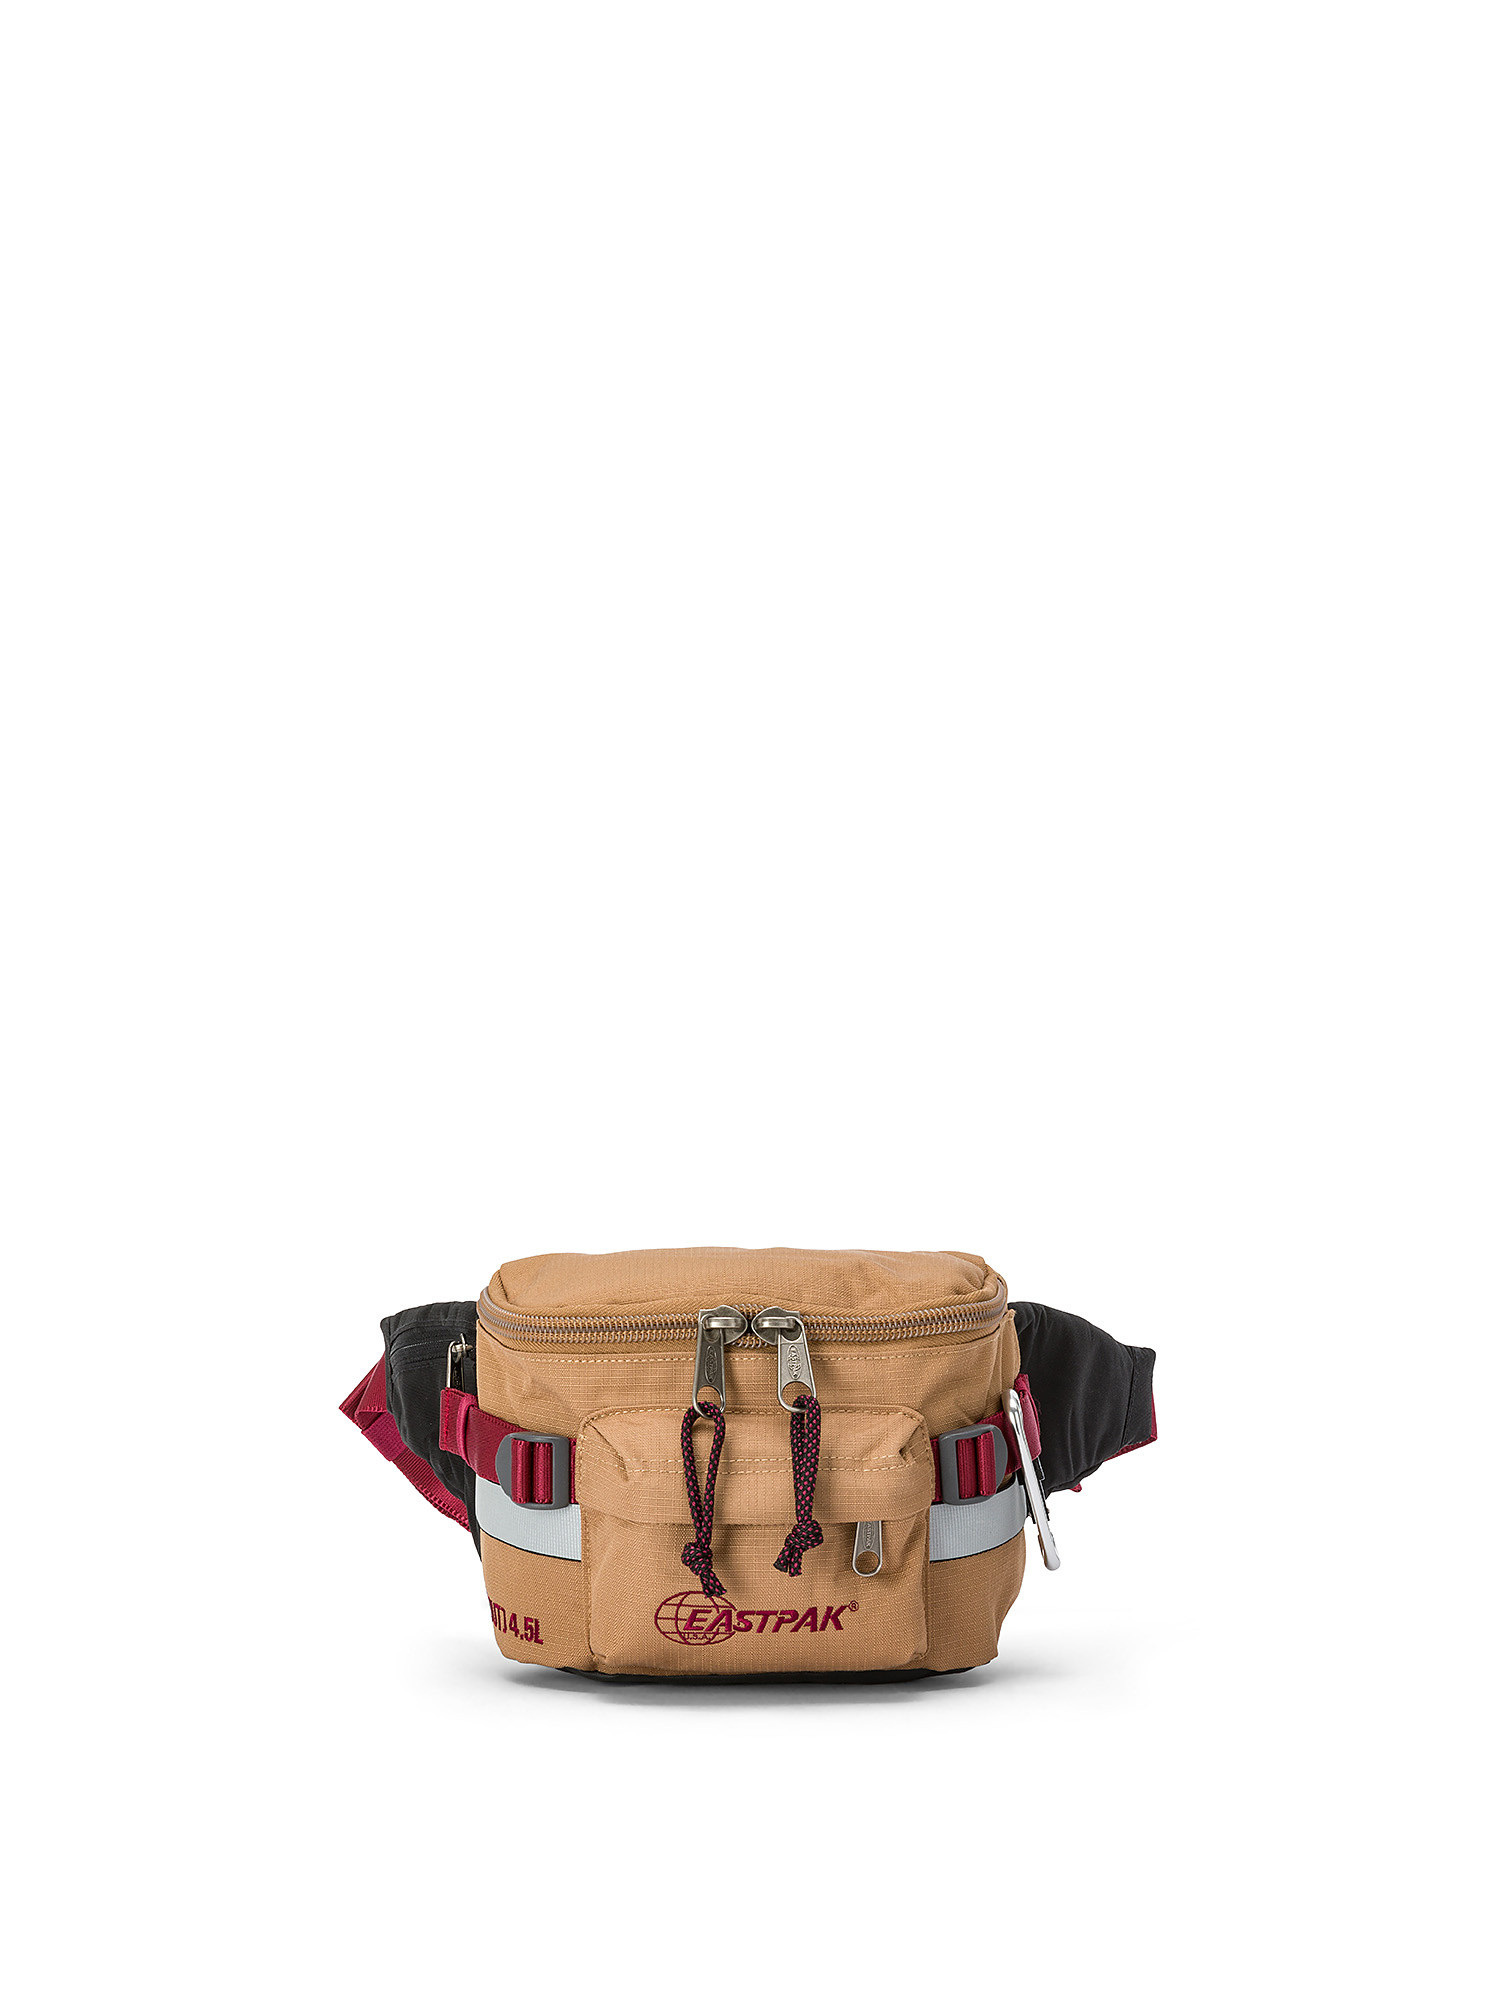 Eastpak - Marsupio Out Bumbag Out Brown, Marrone chiaro, large image number 0